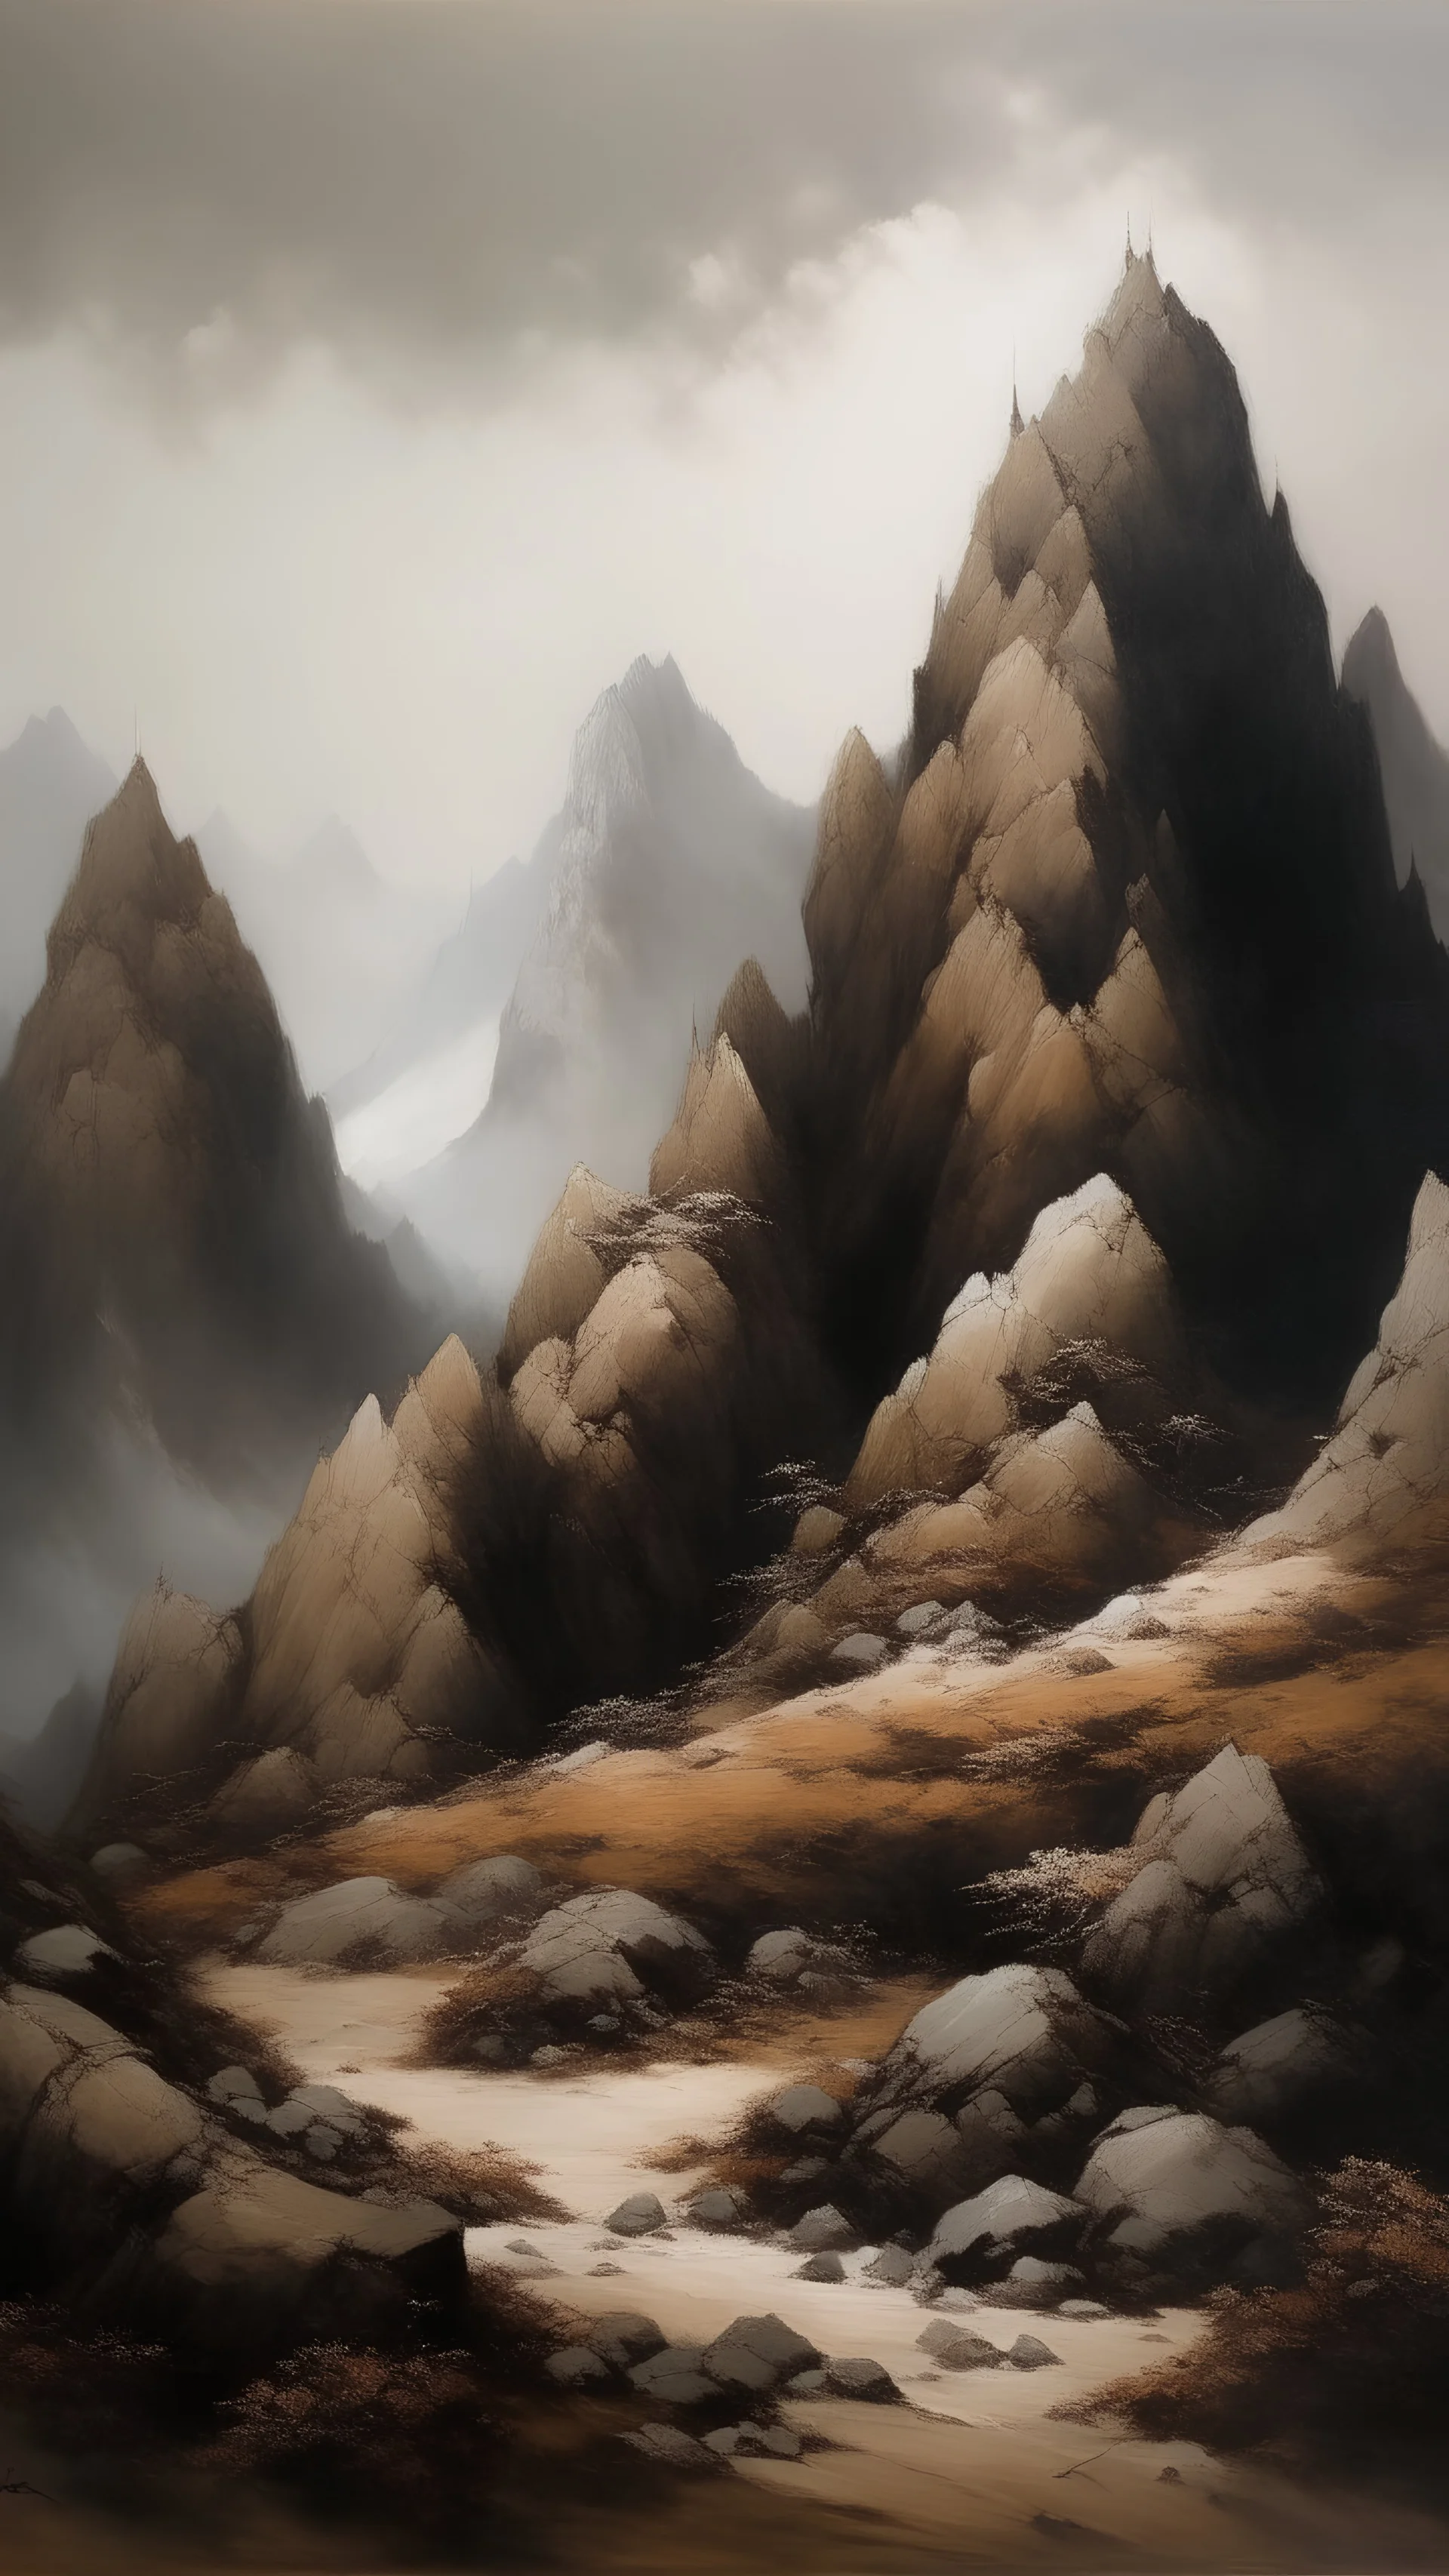 A brown mountain surrounded by rocks painted by Zhang Lu